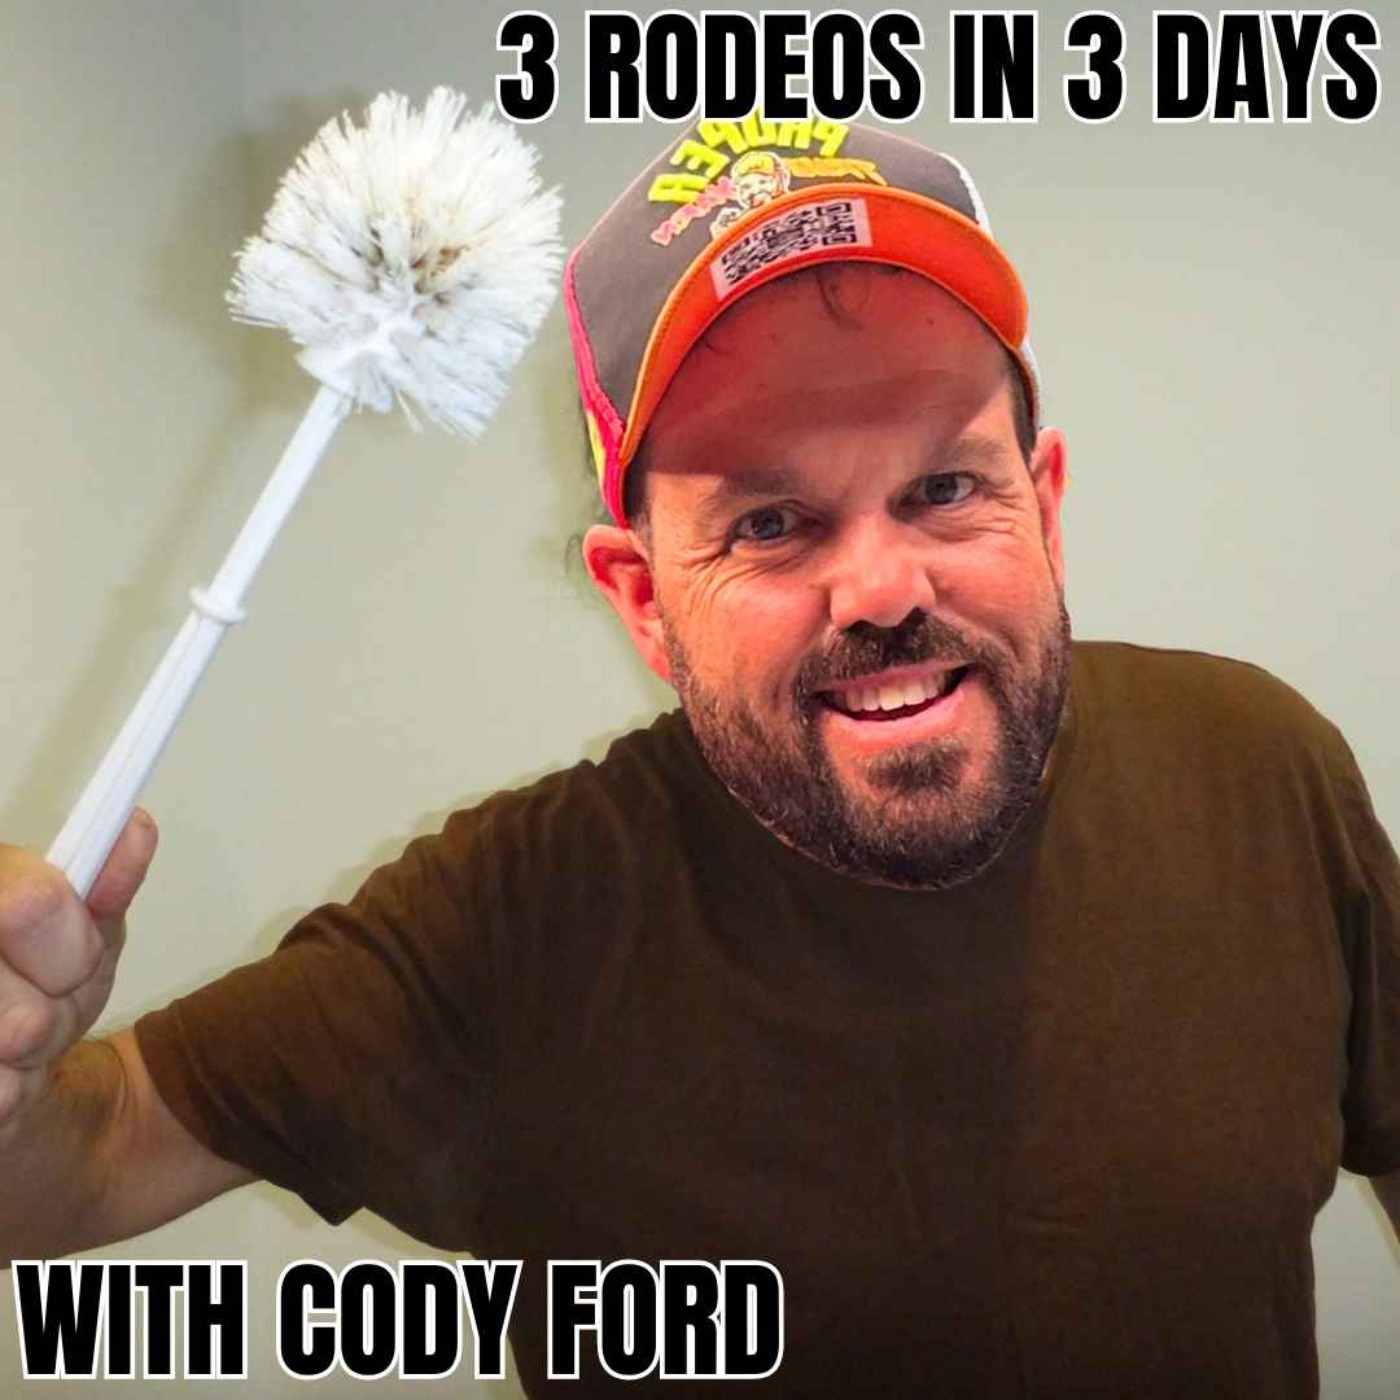 3 Rodeos in 3 Days With Cody Ford